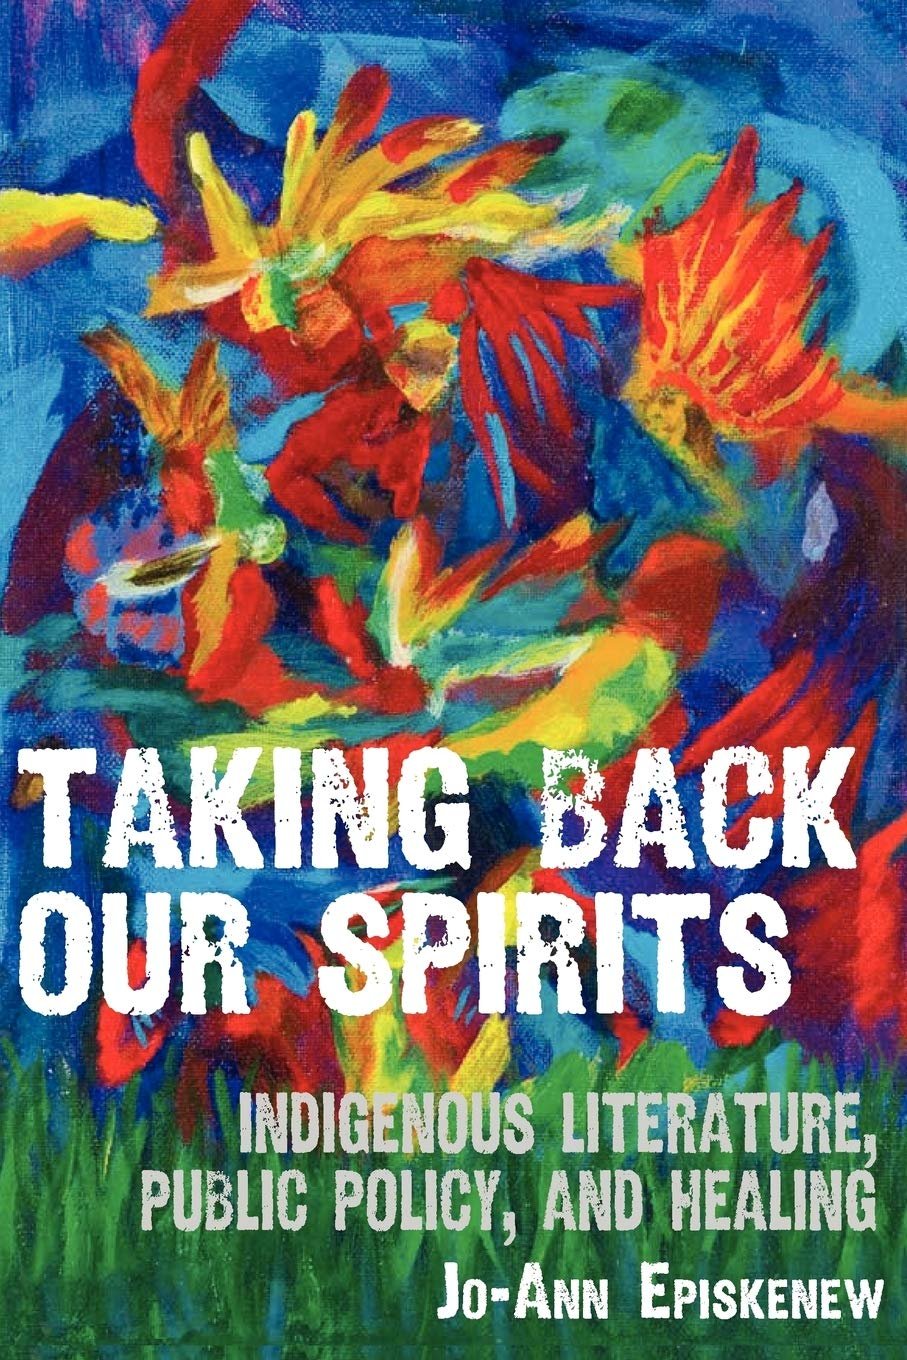 Taking Back Our Spirits - Indigenous Literature, Public Policy, and Healing